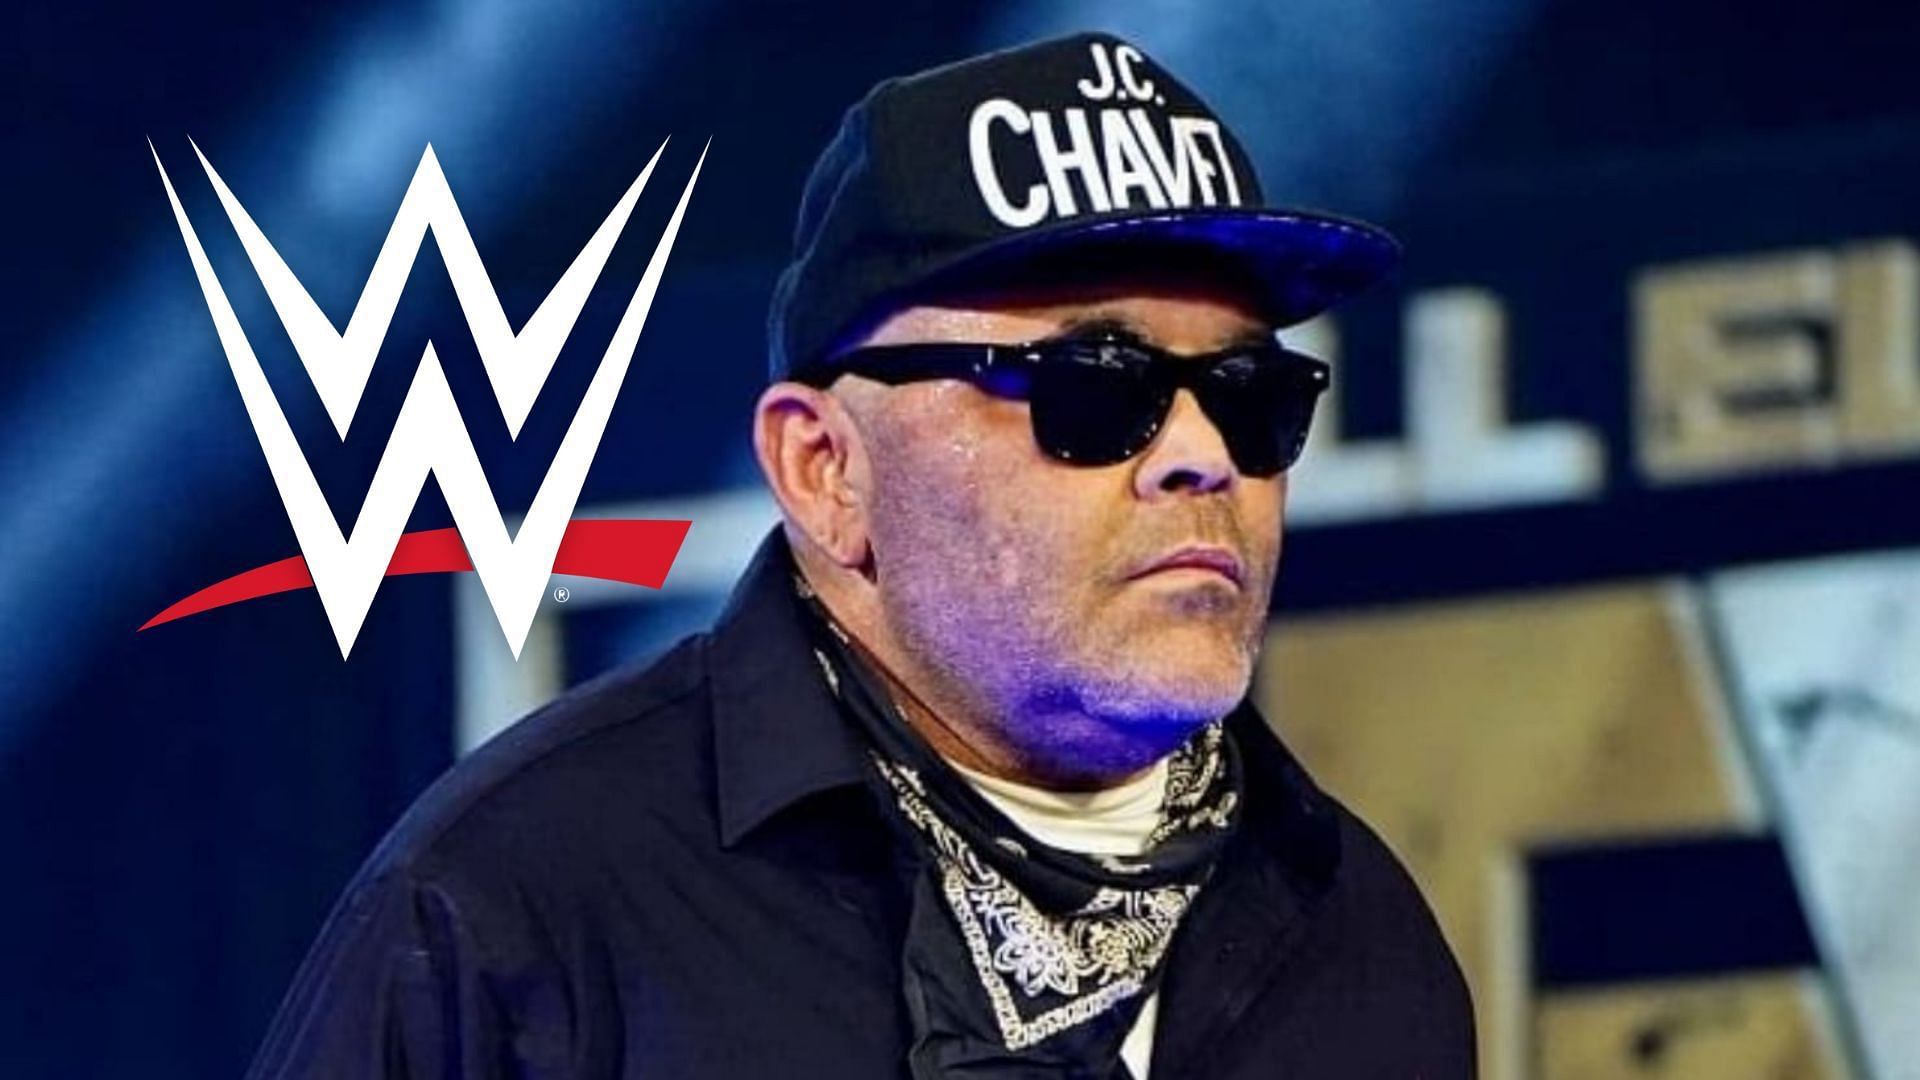 WCW veteran Konnan shares his thoughts on AEW